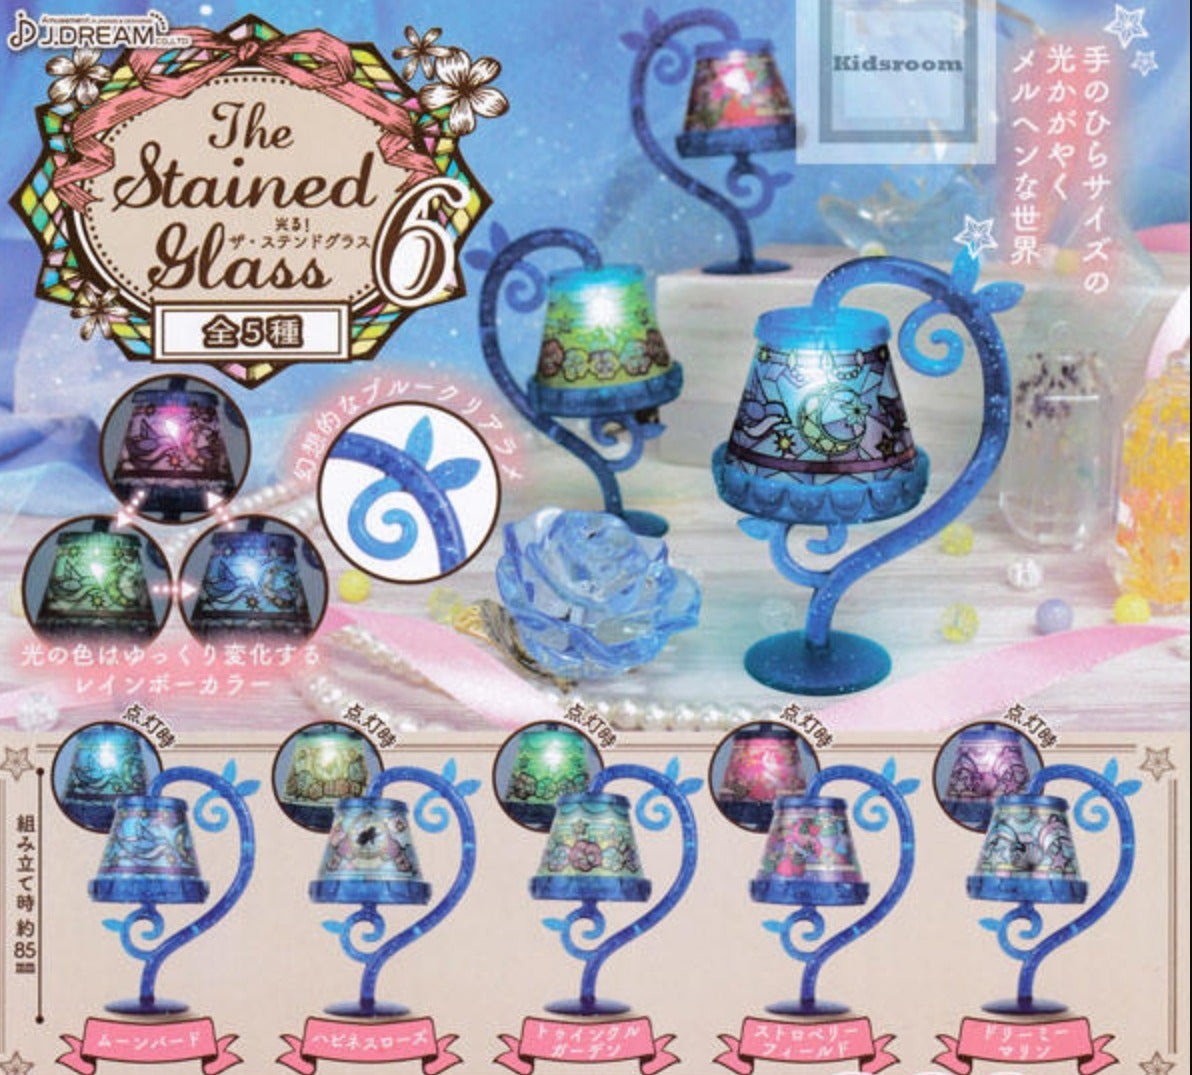 J.Dream Gashapon The LED Stained Glass Table Lamp Part 6 5 Collection Figure Set